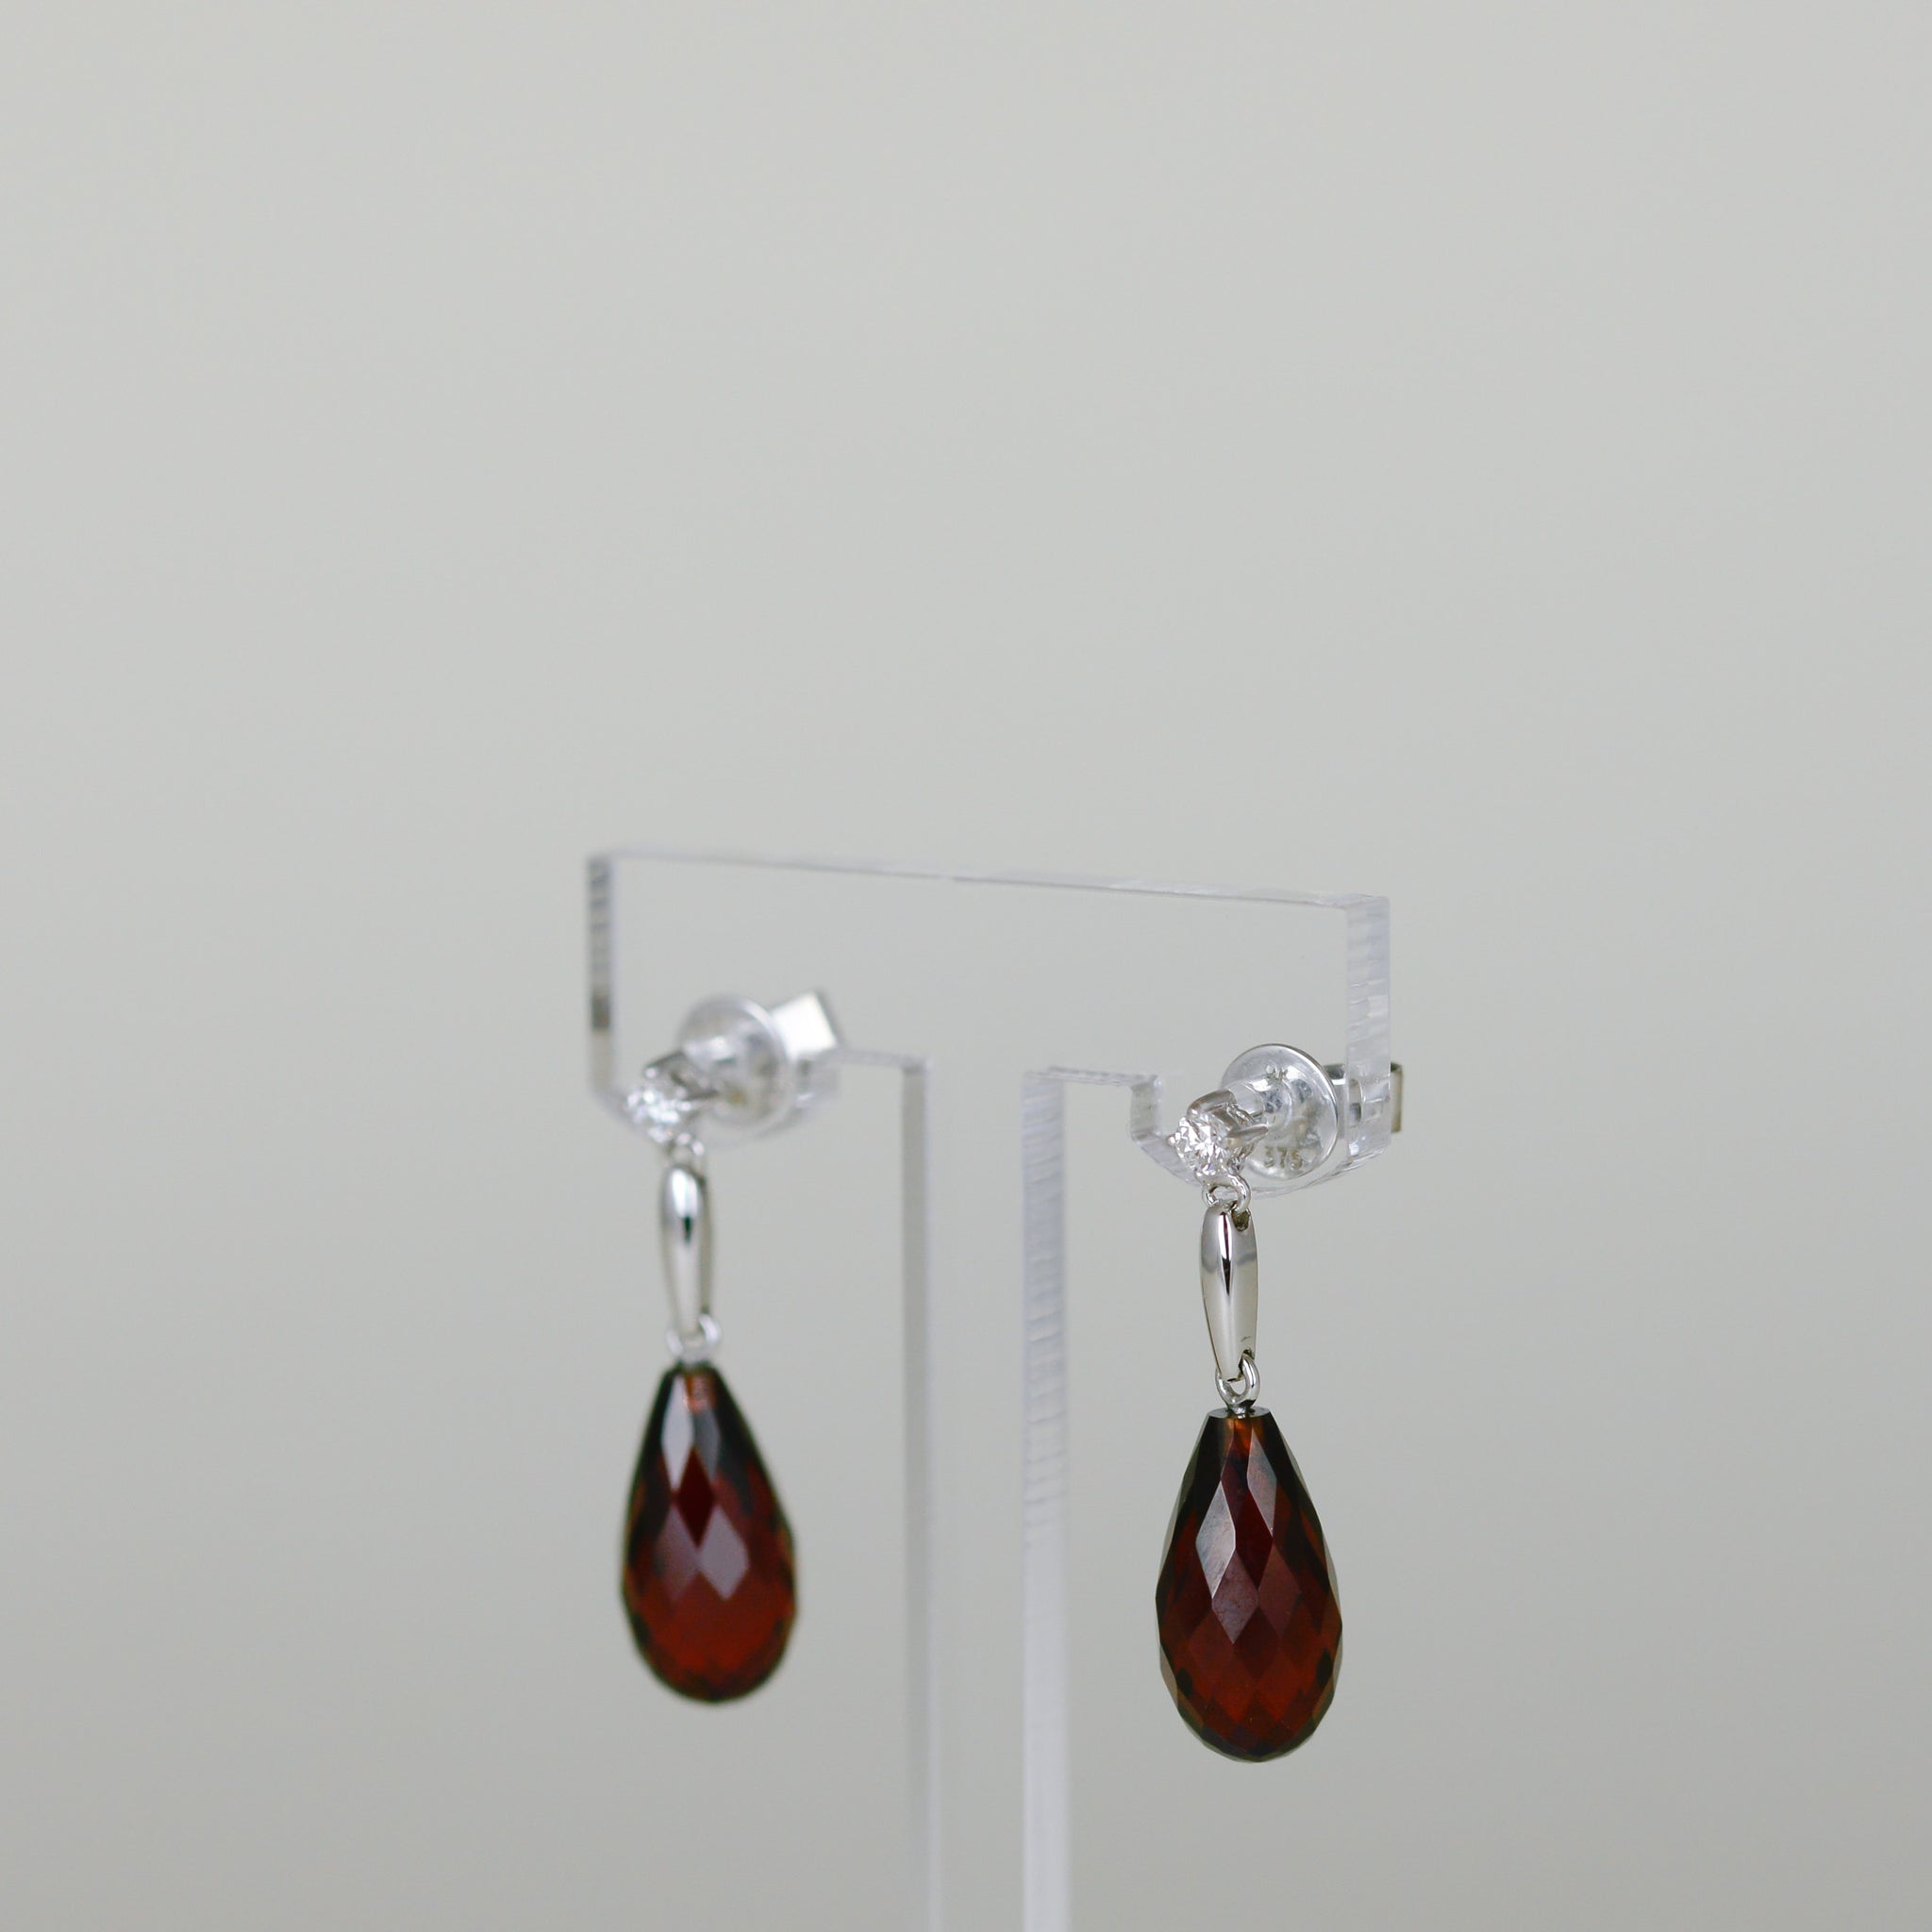 9ct White Gold 14.00ct Pear Briolette Garnet and Diamond Drop Earrings